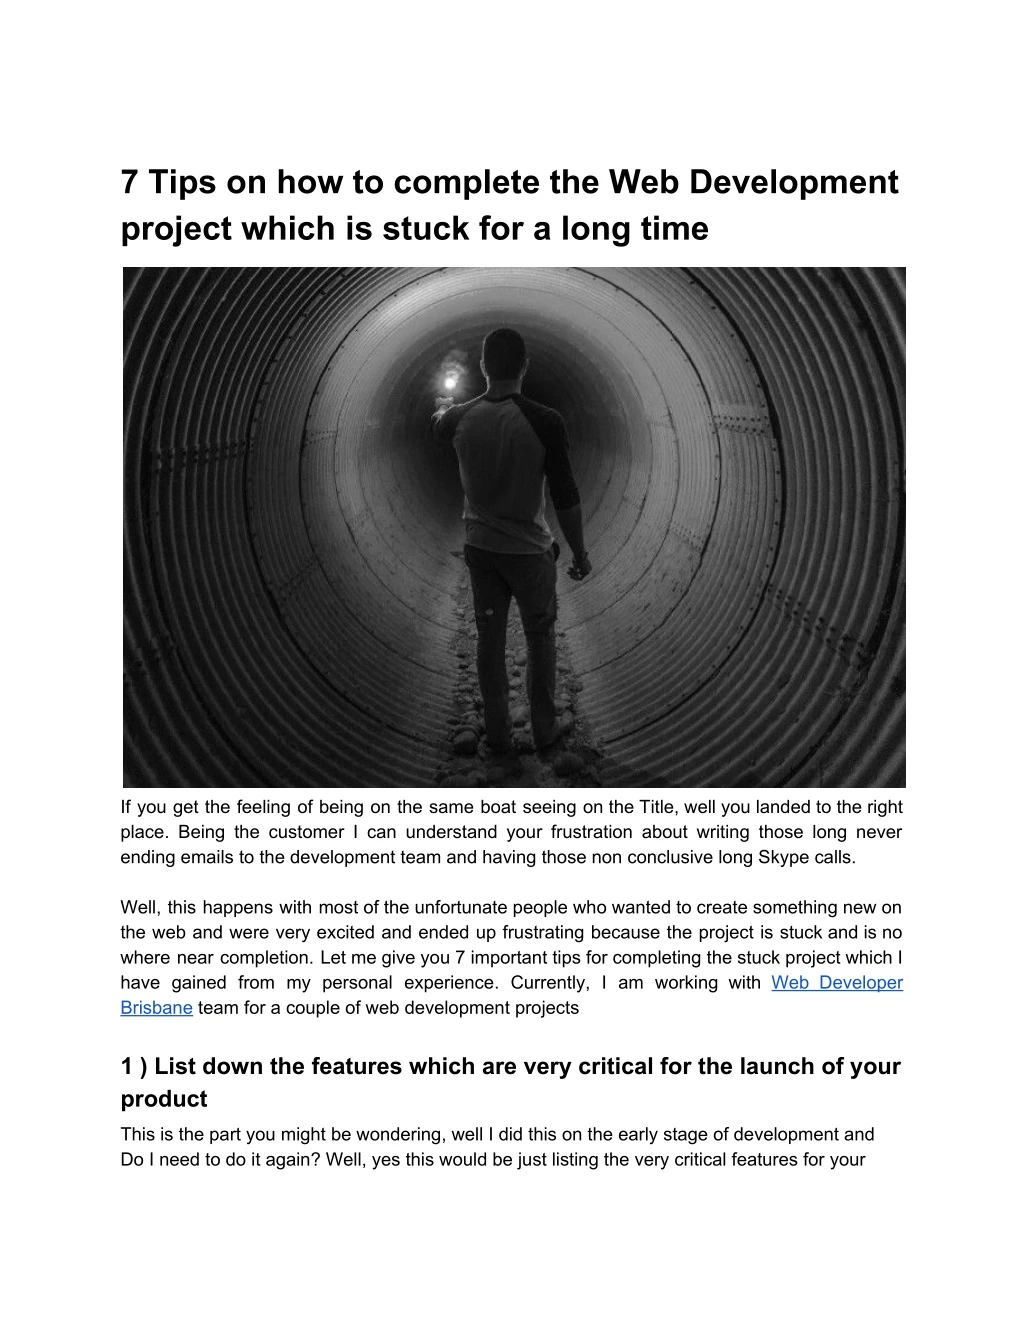 7 tips on how to complete the web development